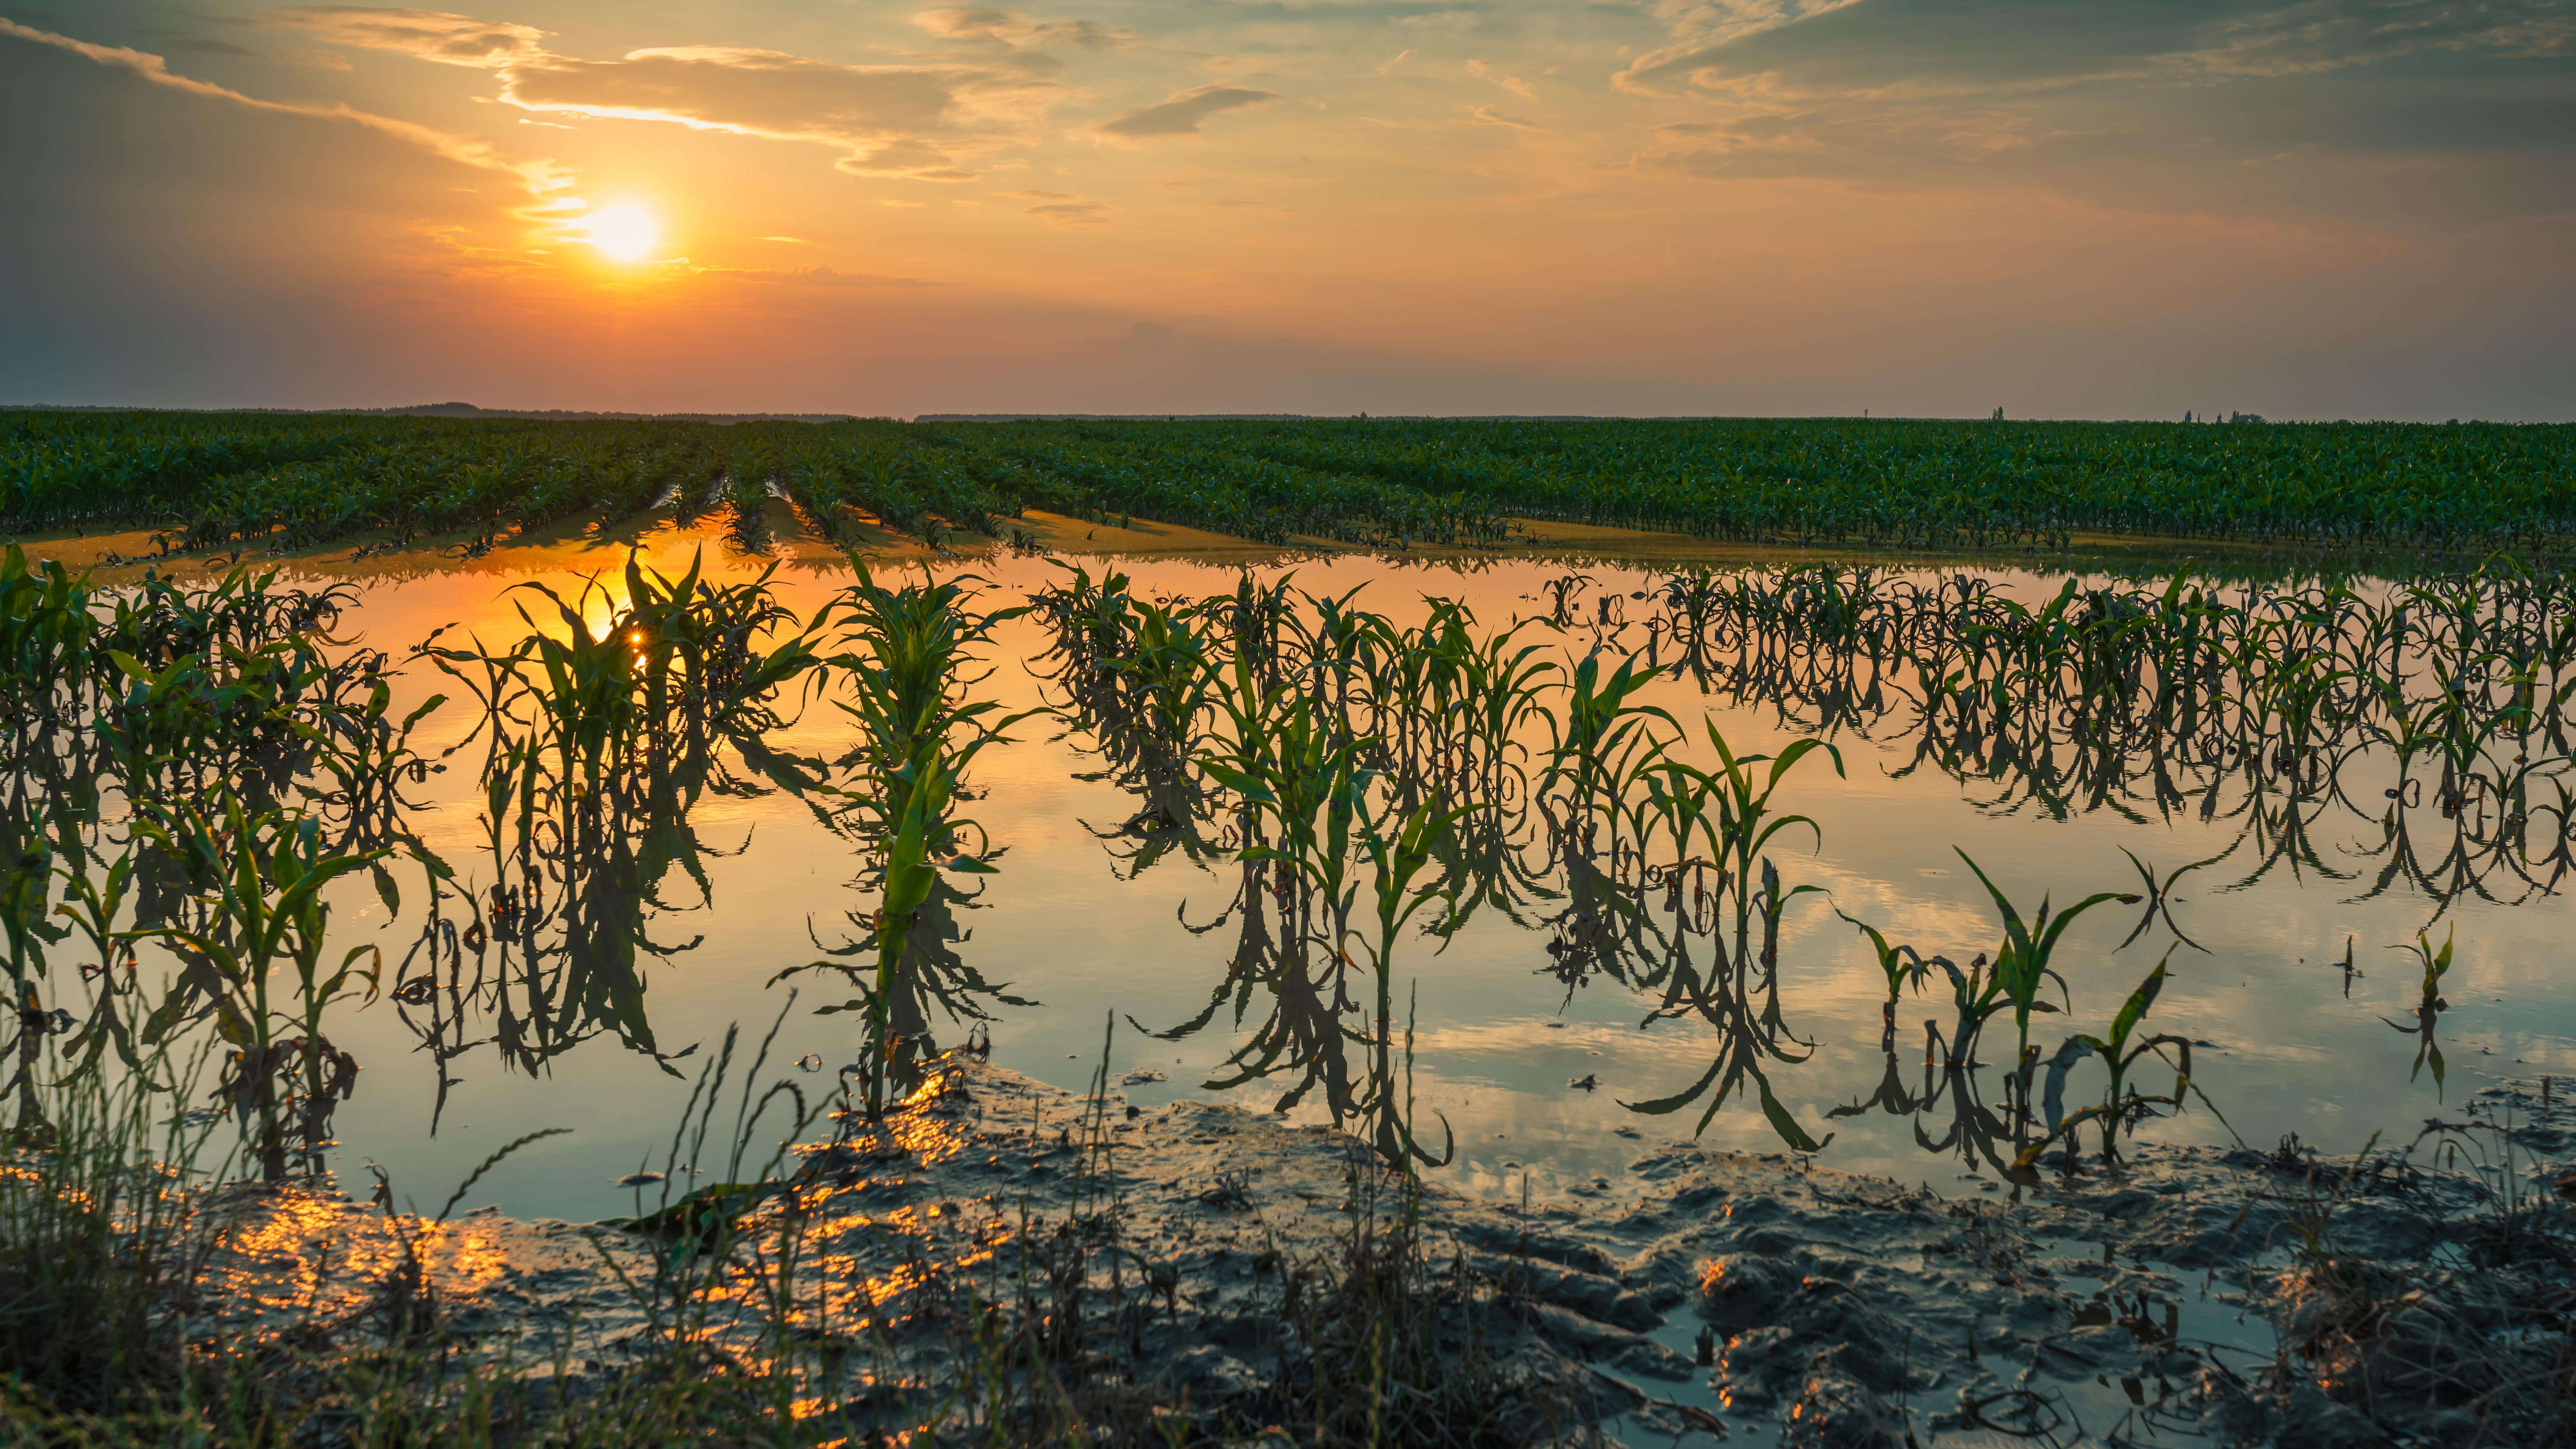 Flooded young corn field with damaged crops in sunset